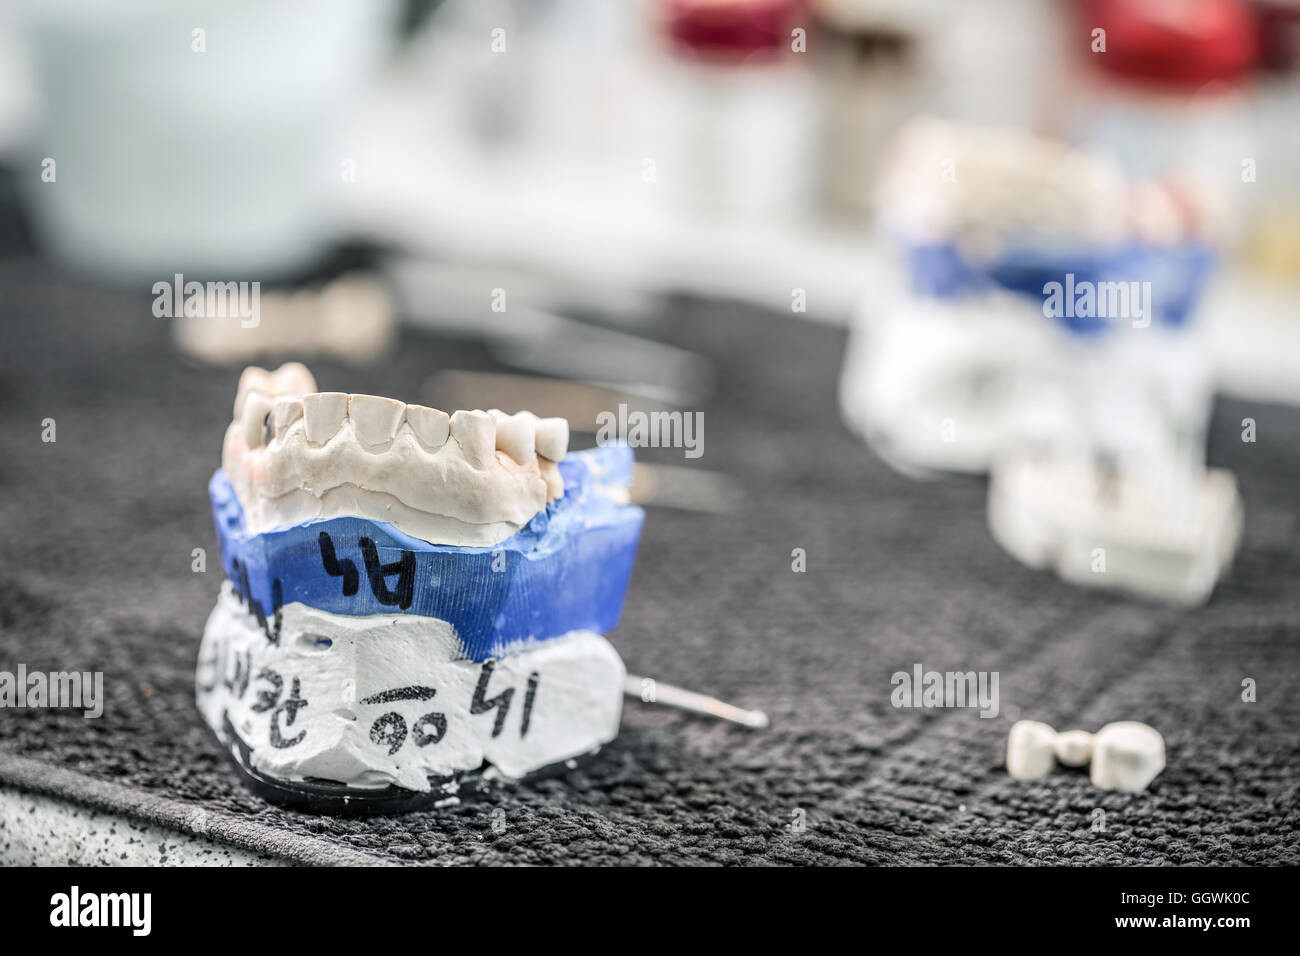 Table of dental technician workplace Stock Photo